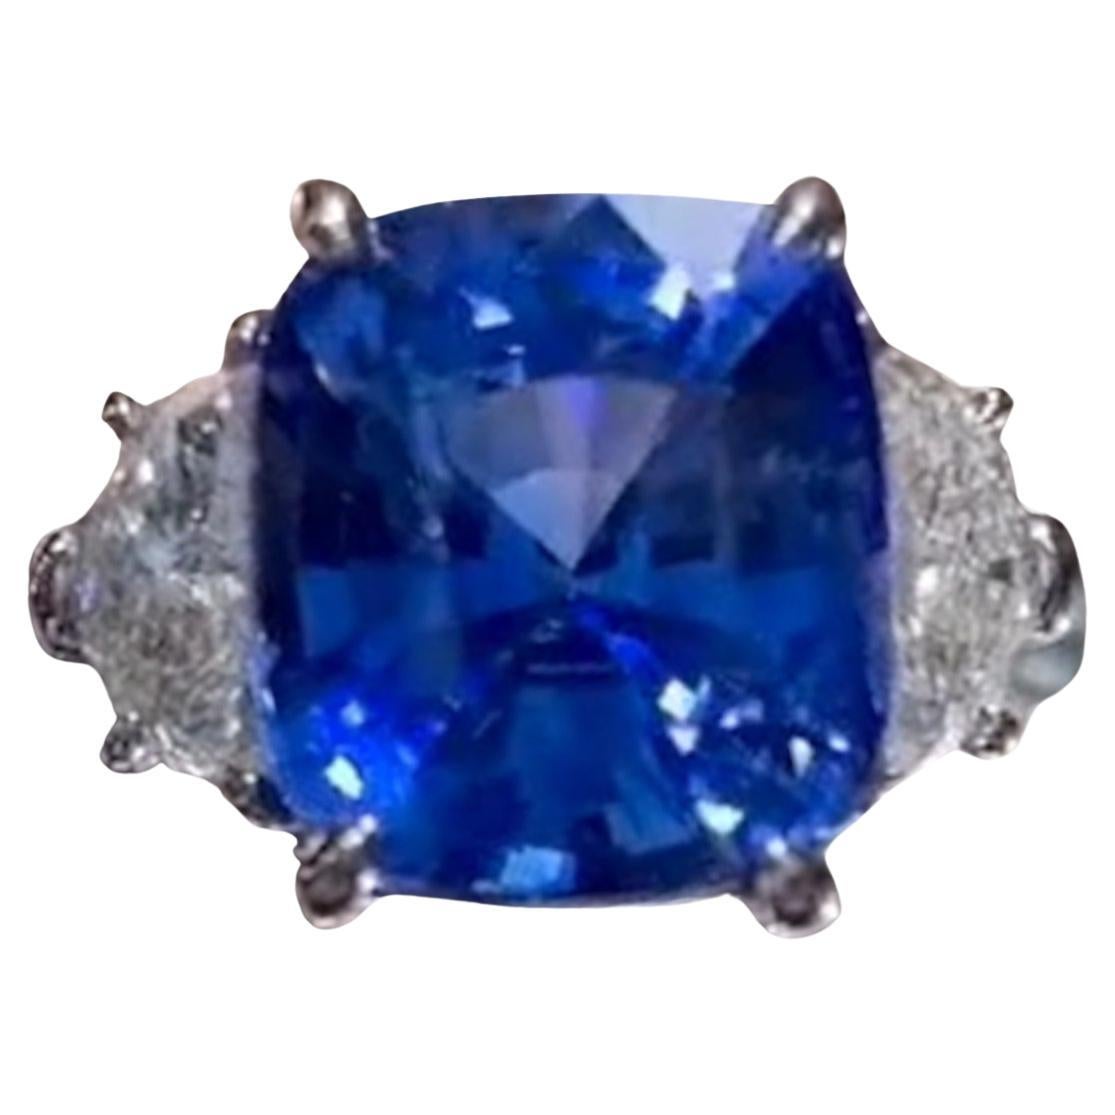 GII 5.28 Certified Sapphire Has Vibrant Blue Color For Sale